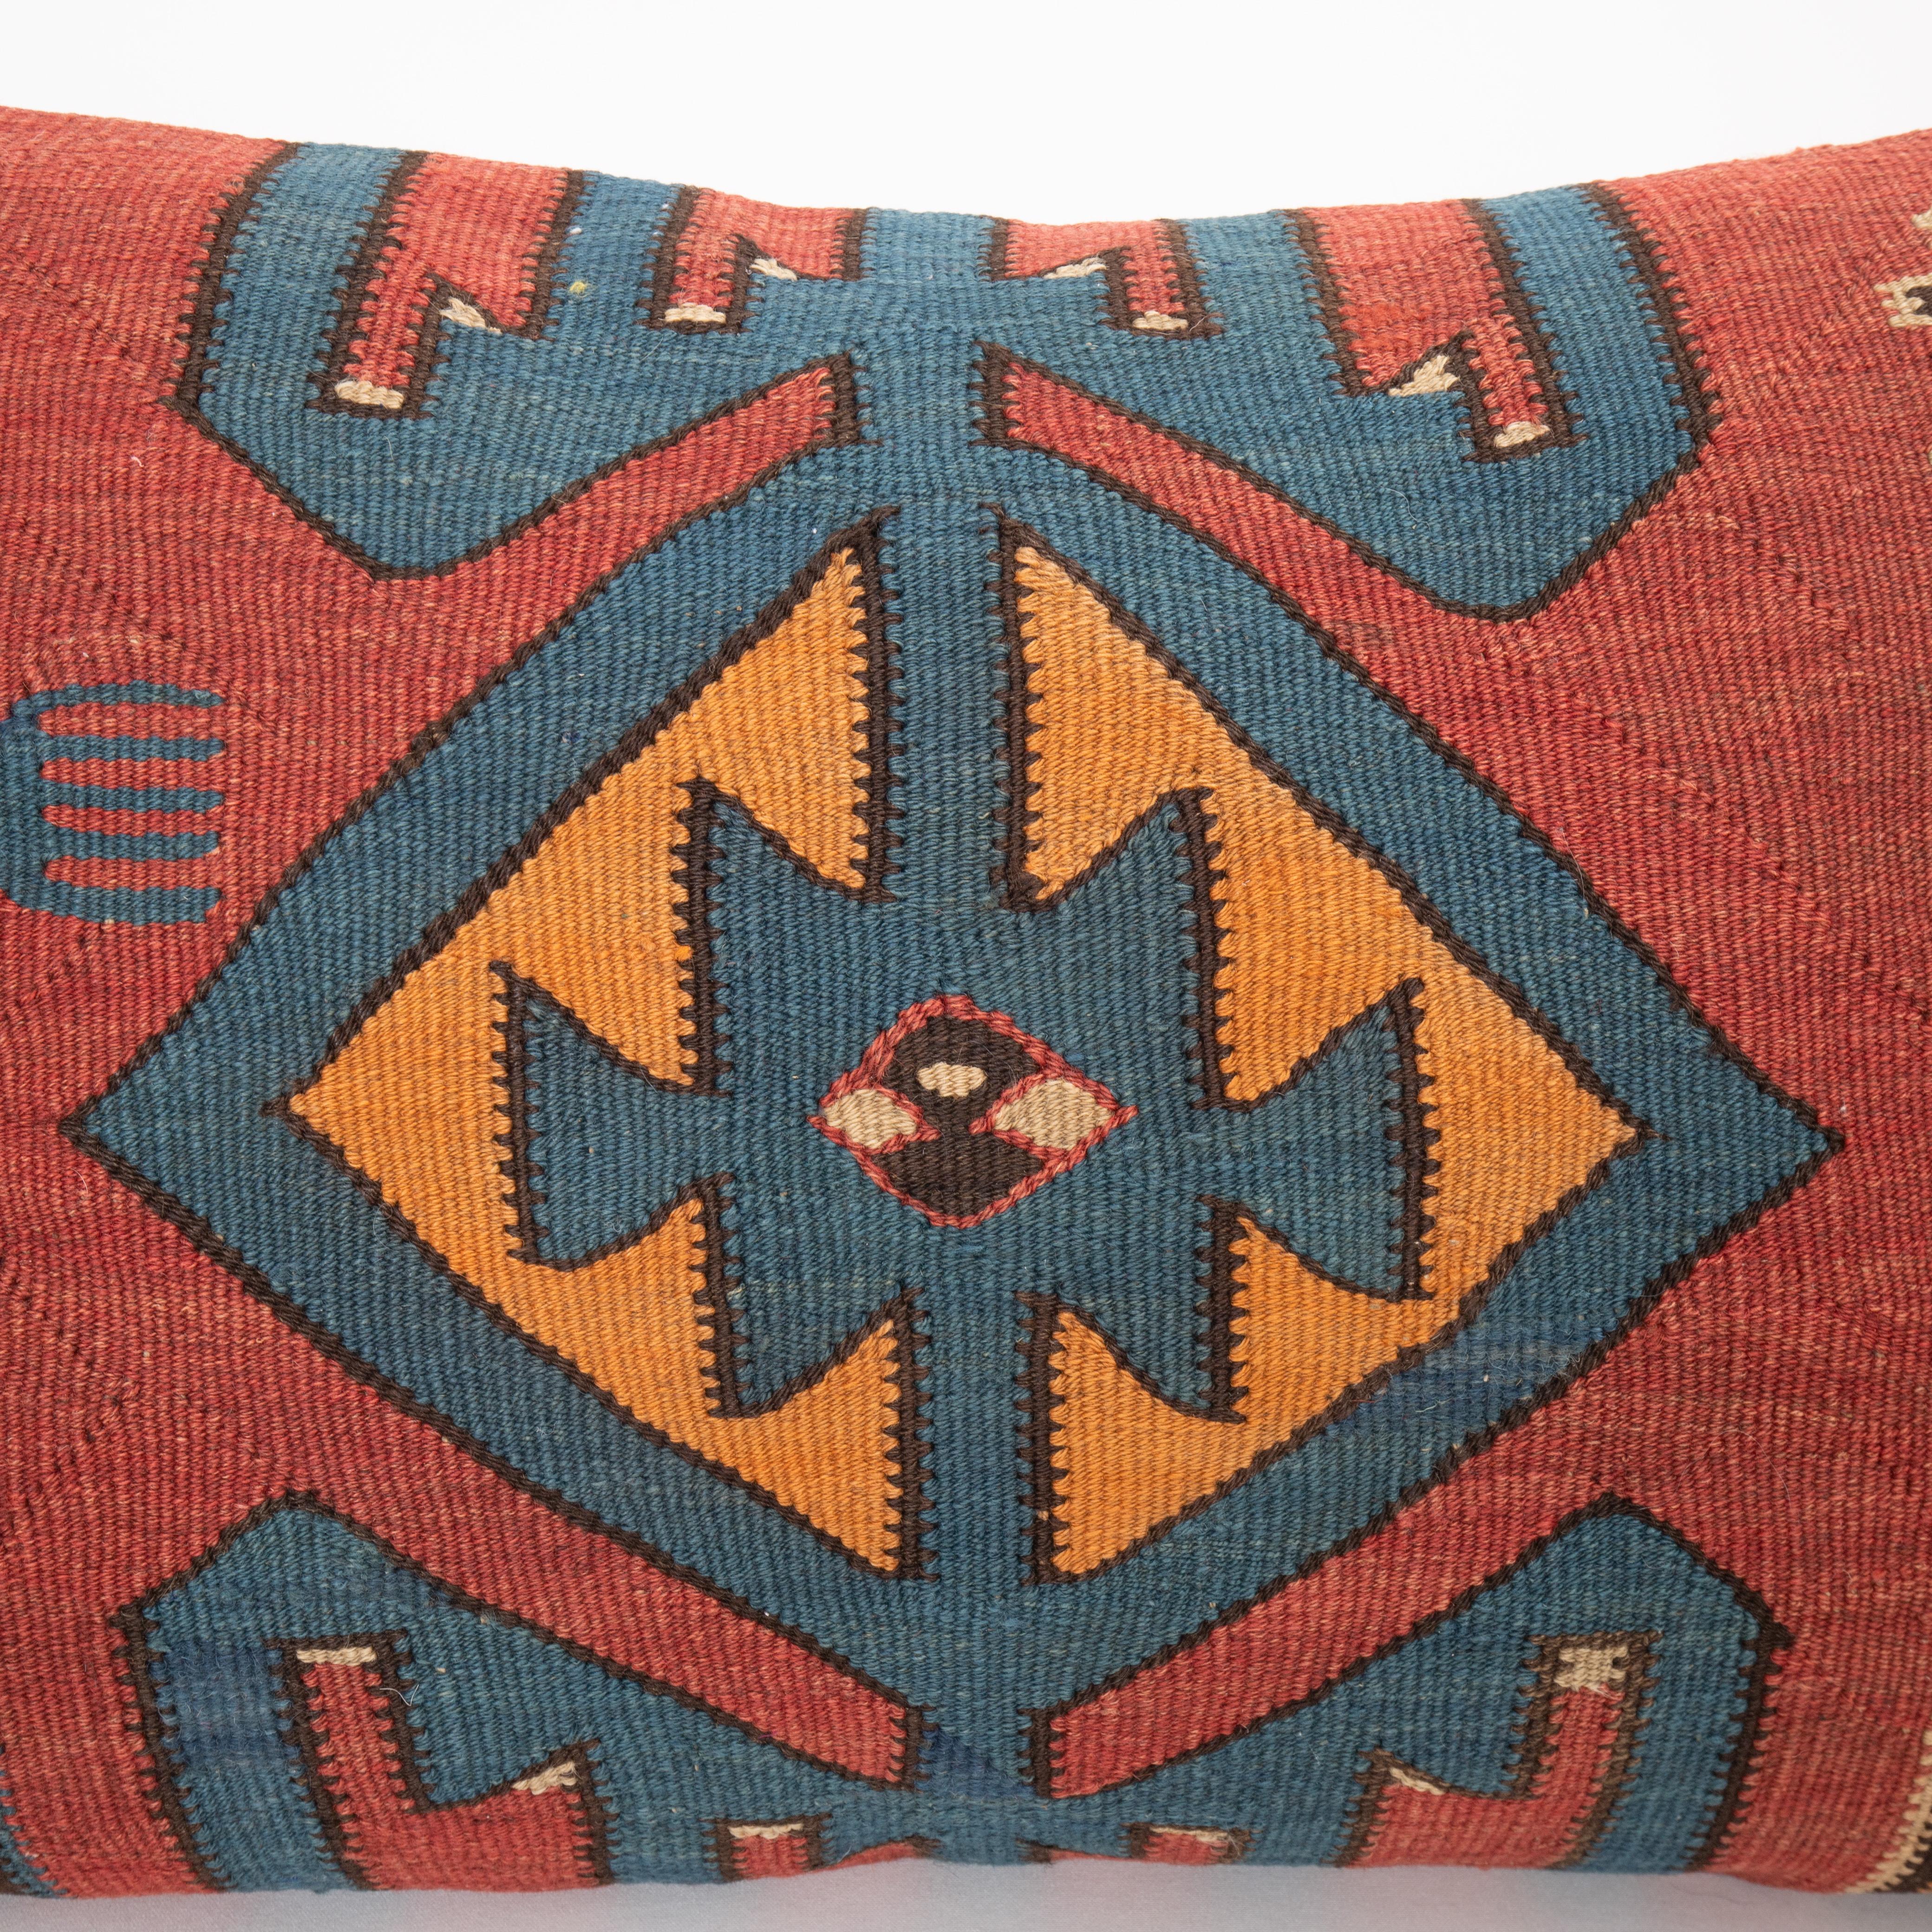 Hand-Woven Floor Cushion Made from an Antique Avar Kilim from Dagestan , Early 20th C. For Sale